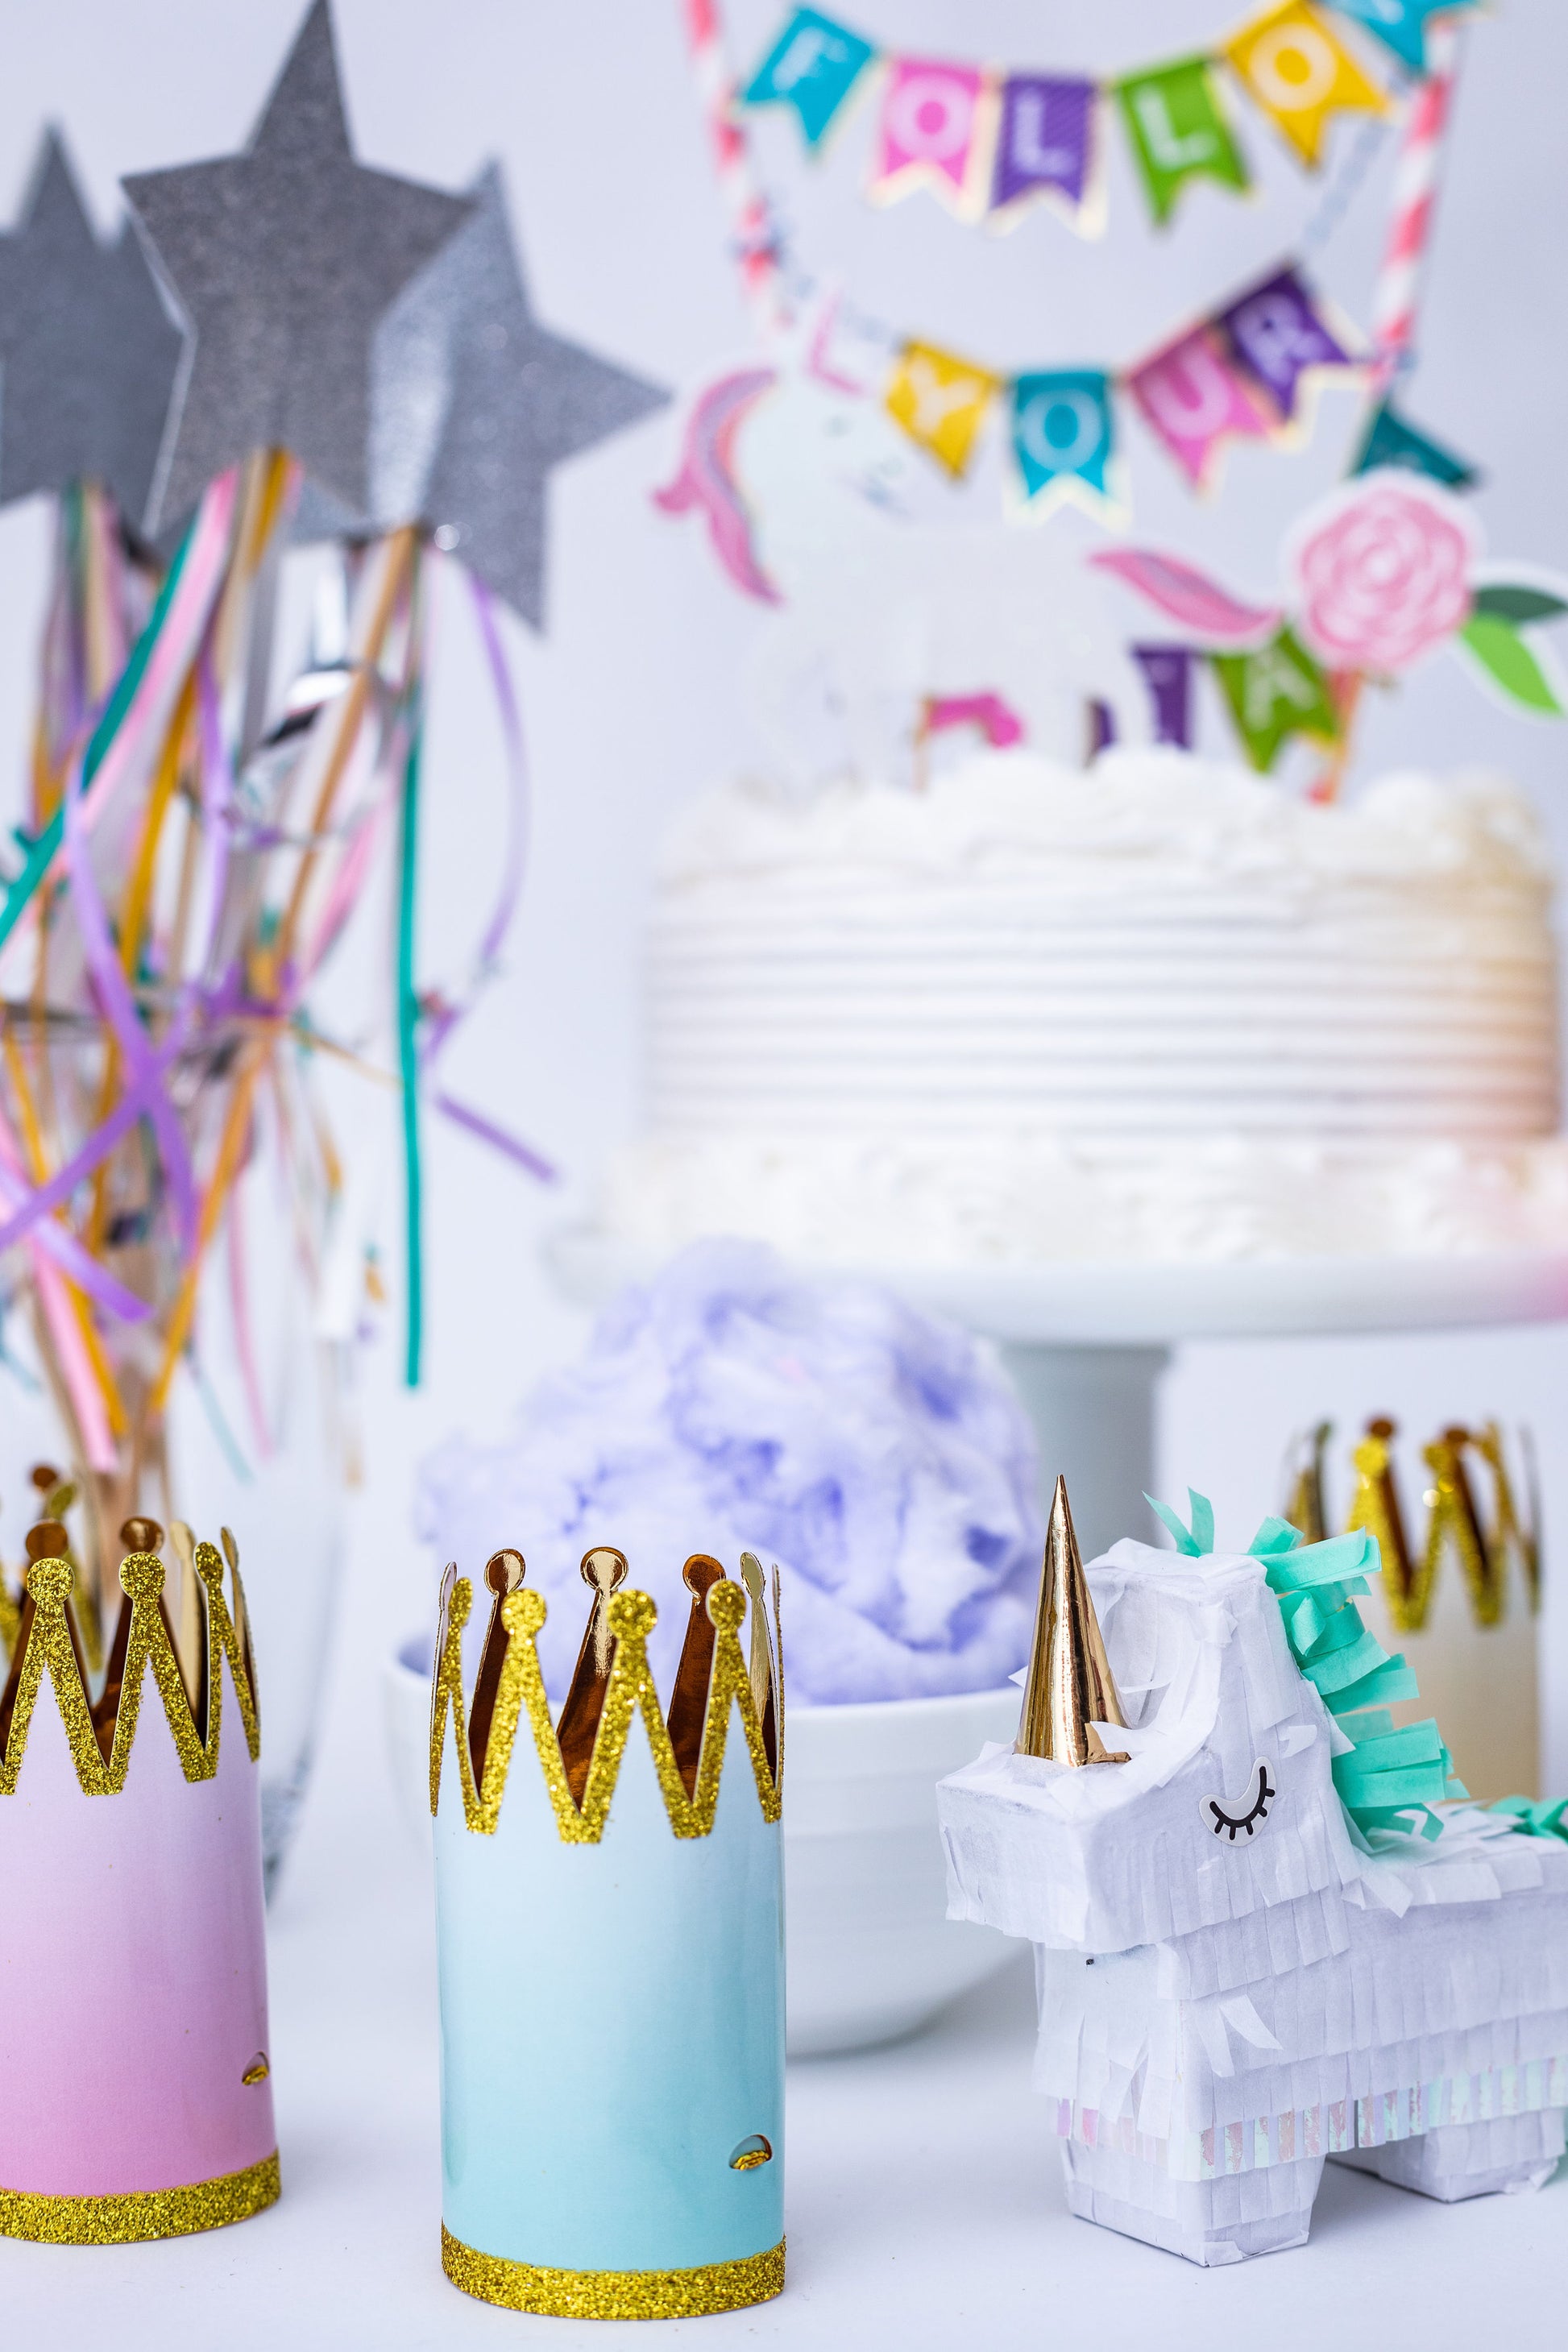 Itty Bitty Crowns Party Partners - Cardmore